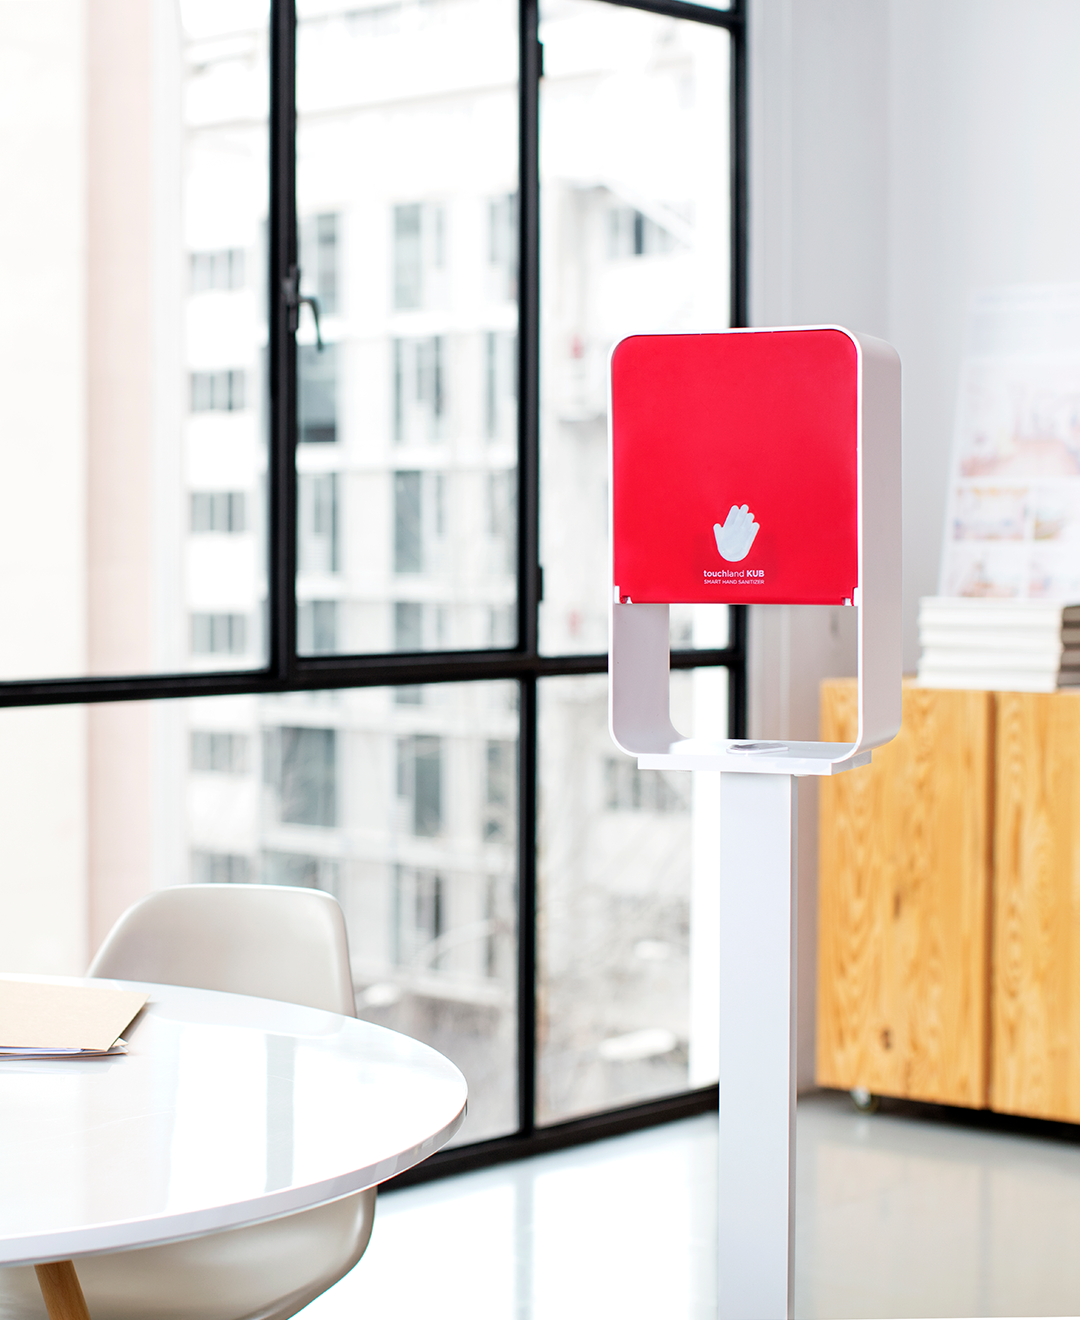 Red kub dispenser on stand in office setting with windows